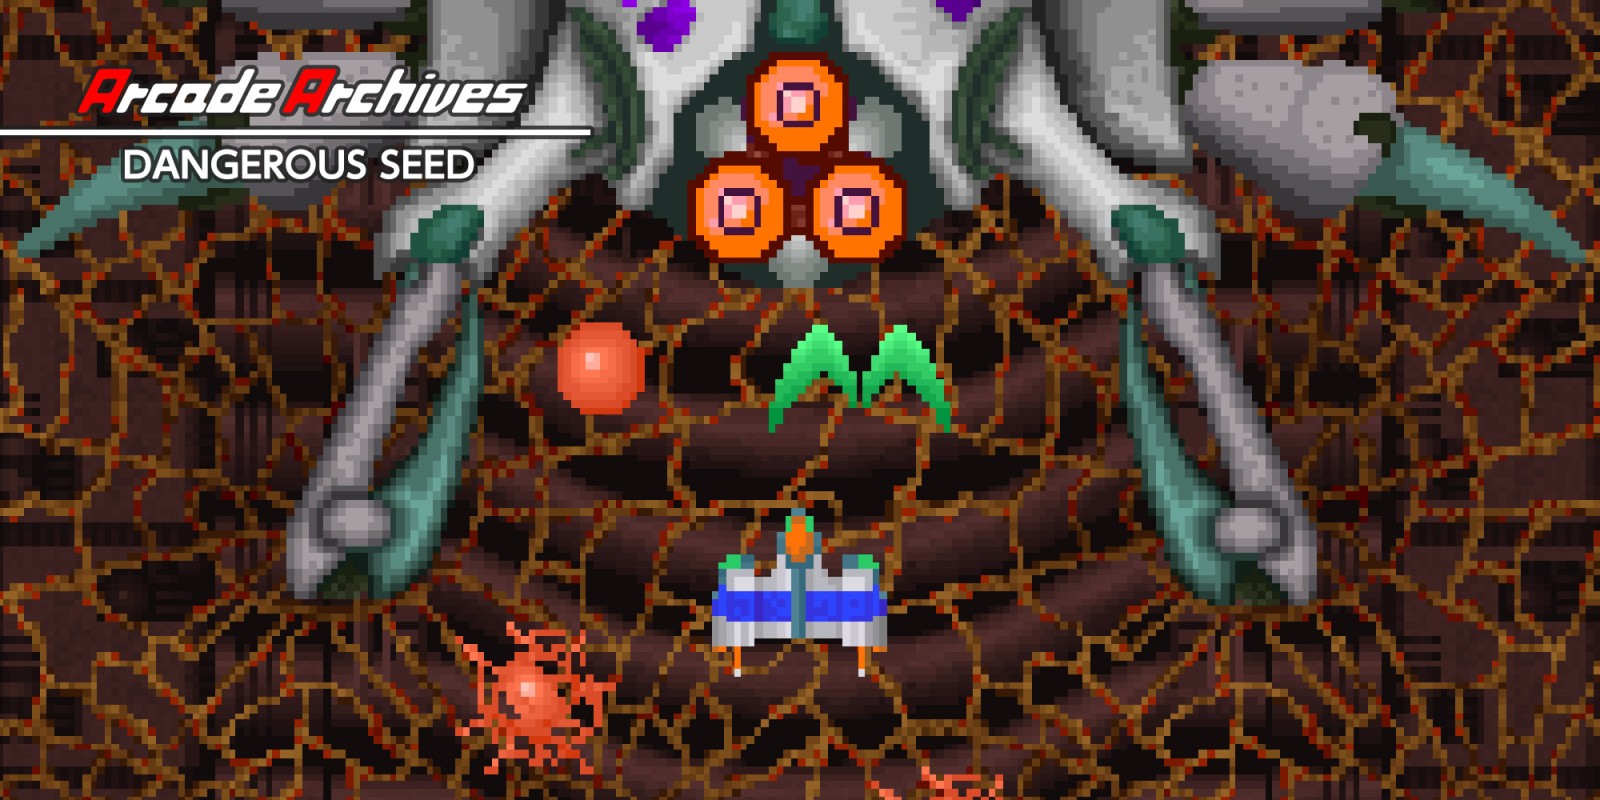 Arcade Archives DANGEROUS SEED